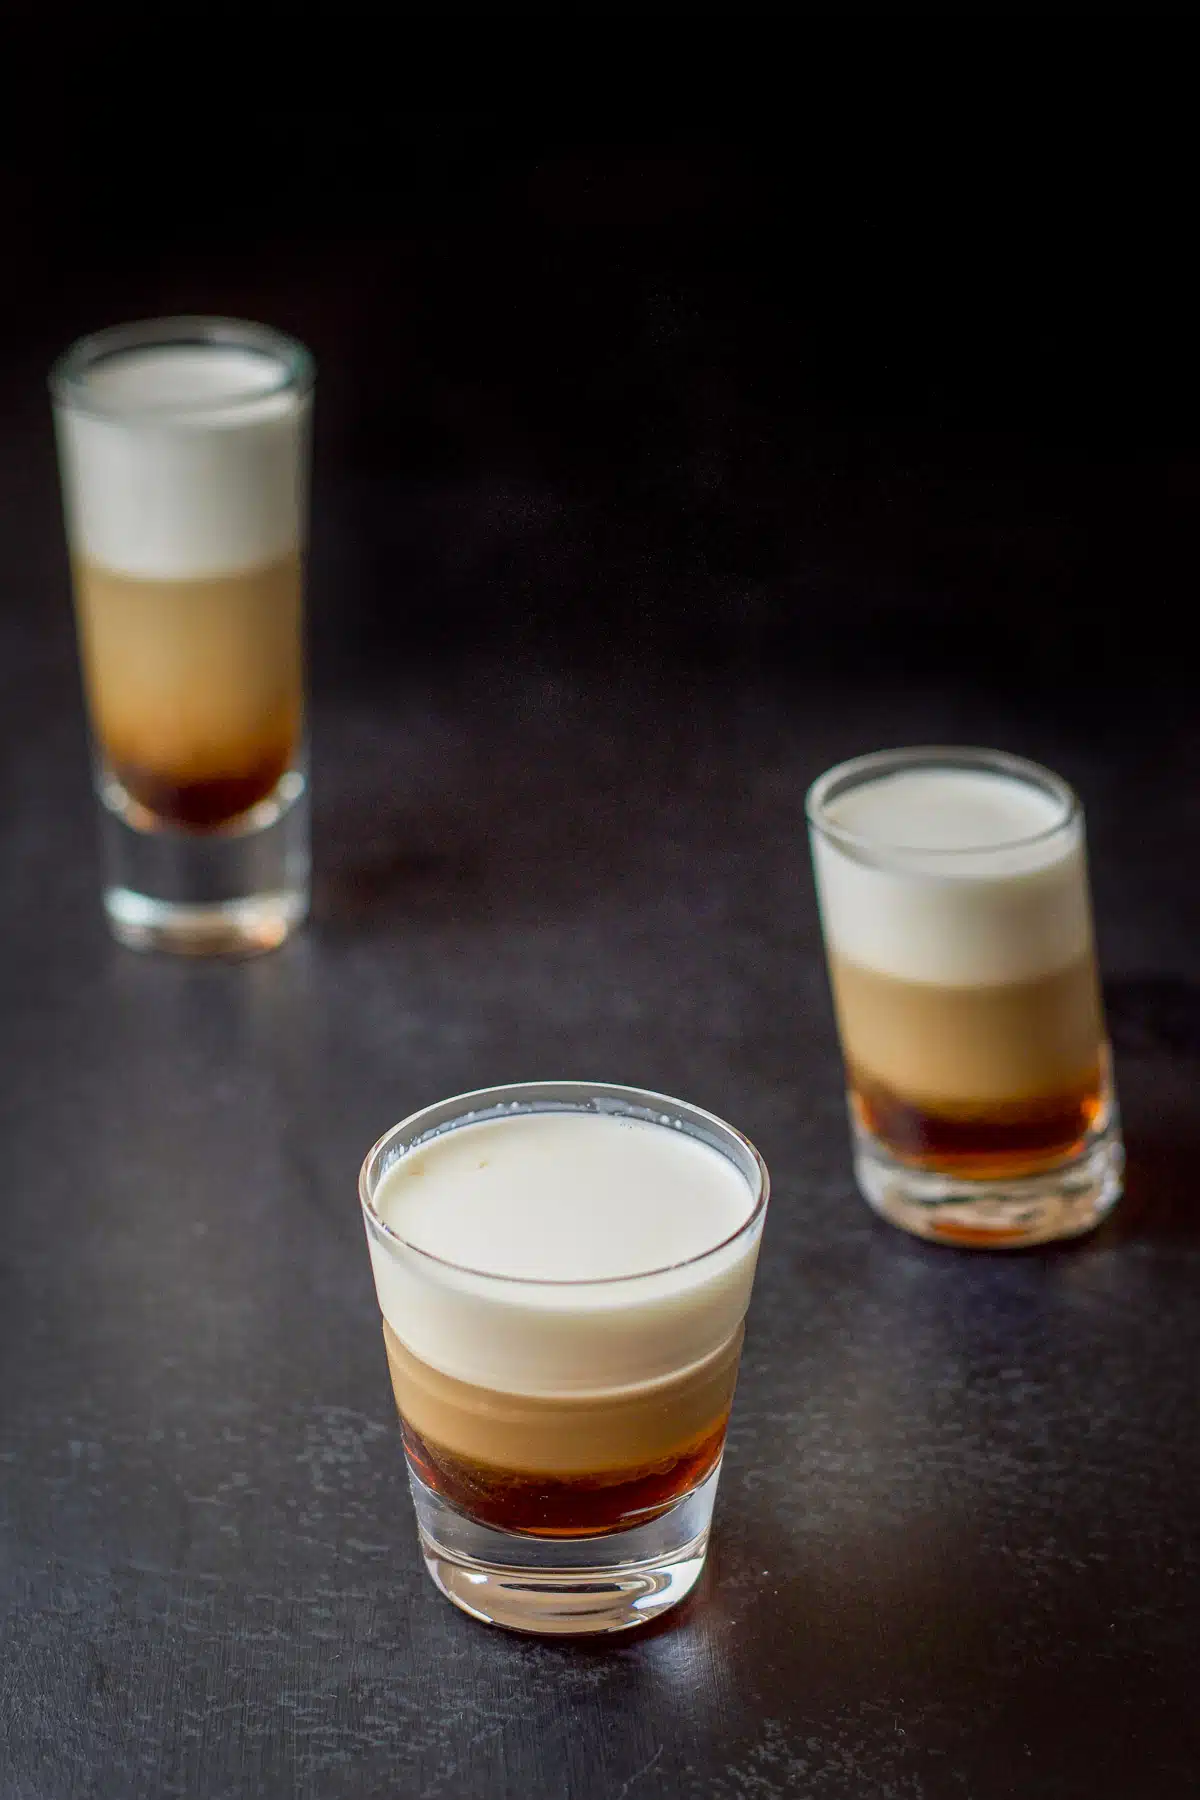 Higher view of the three layered shots with the cream on top